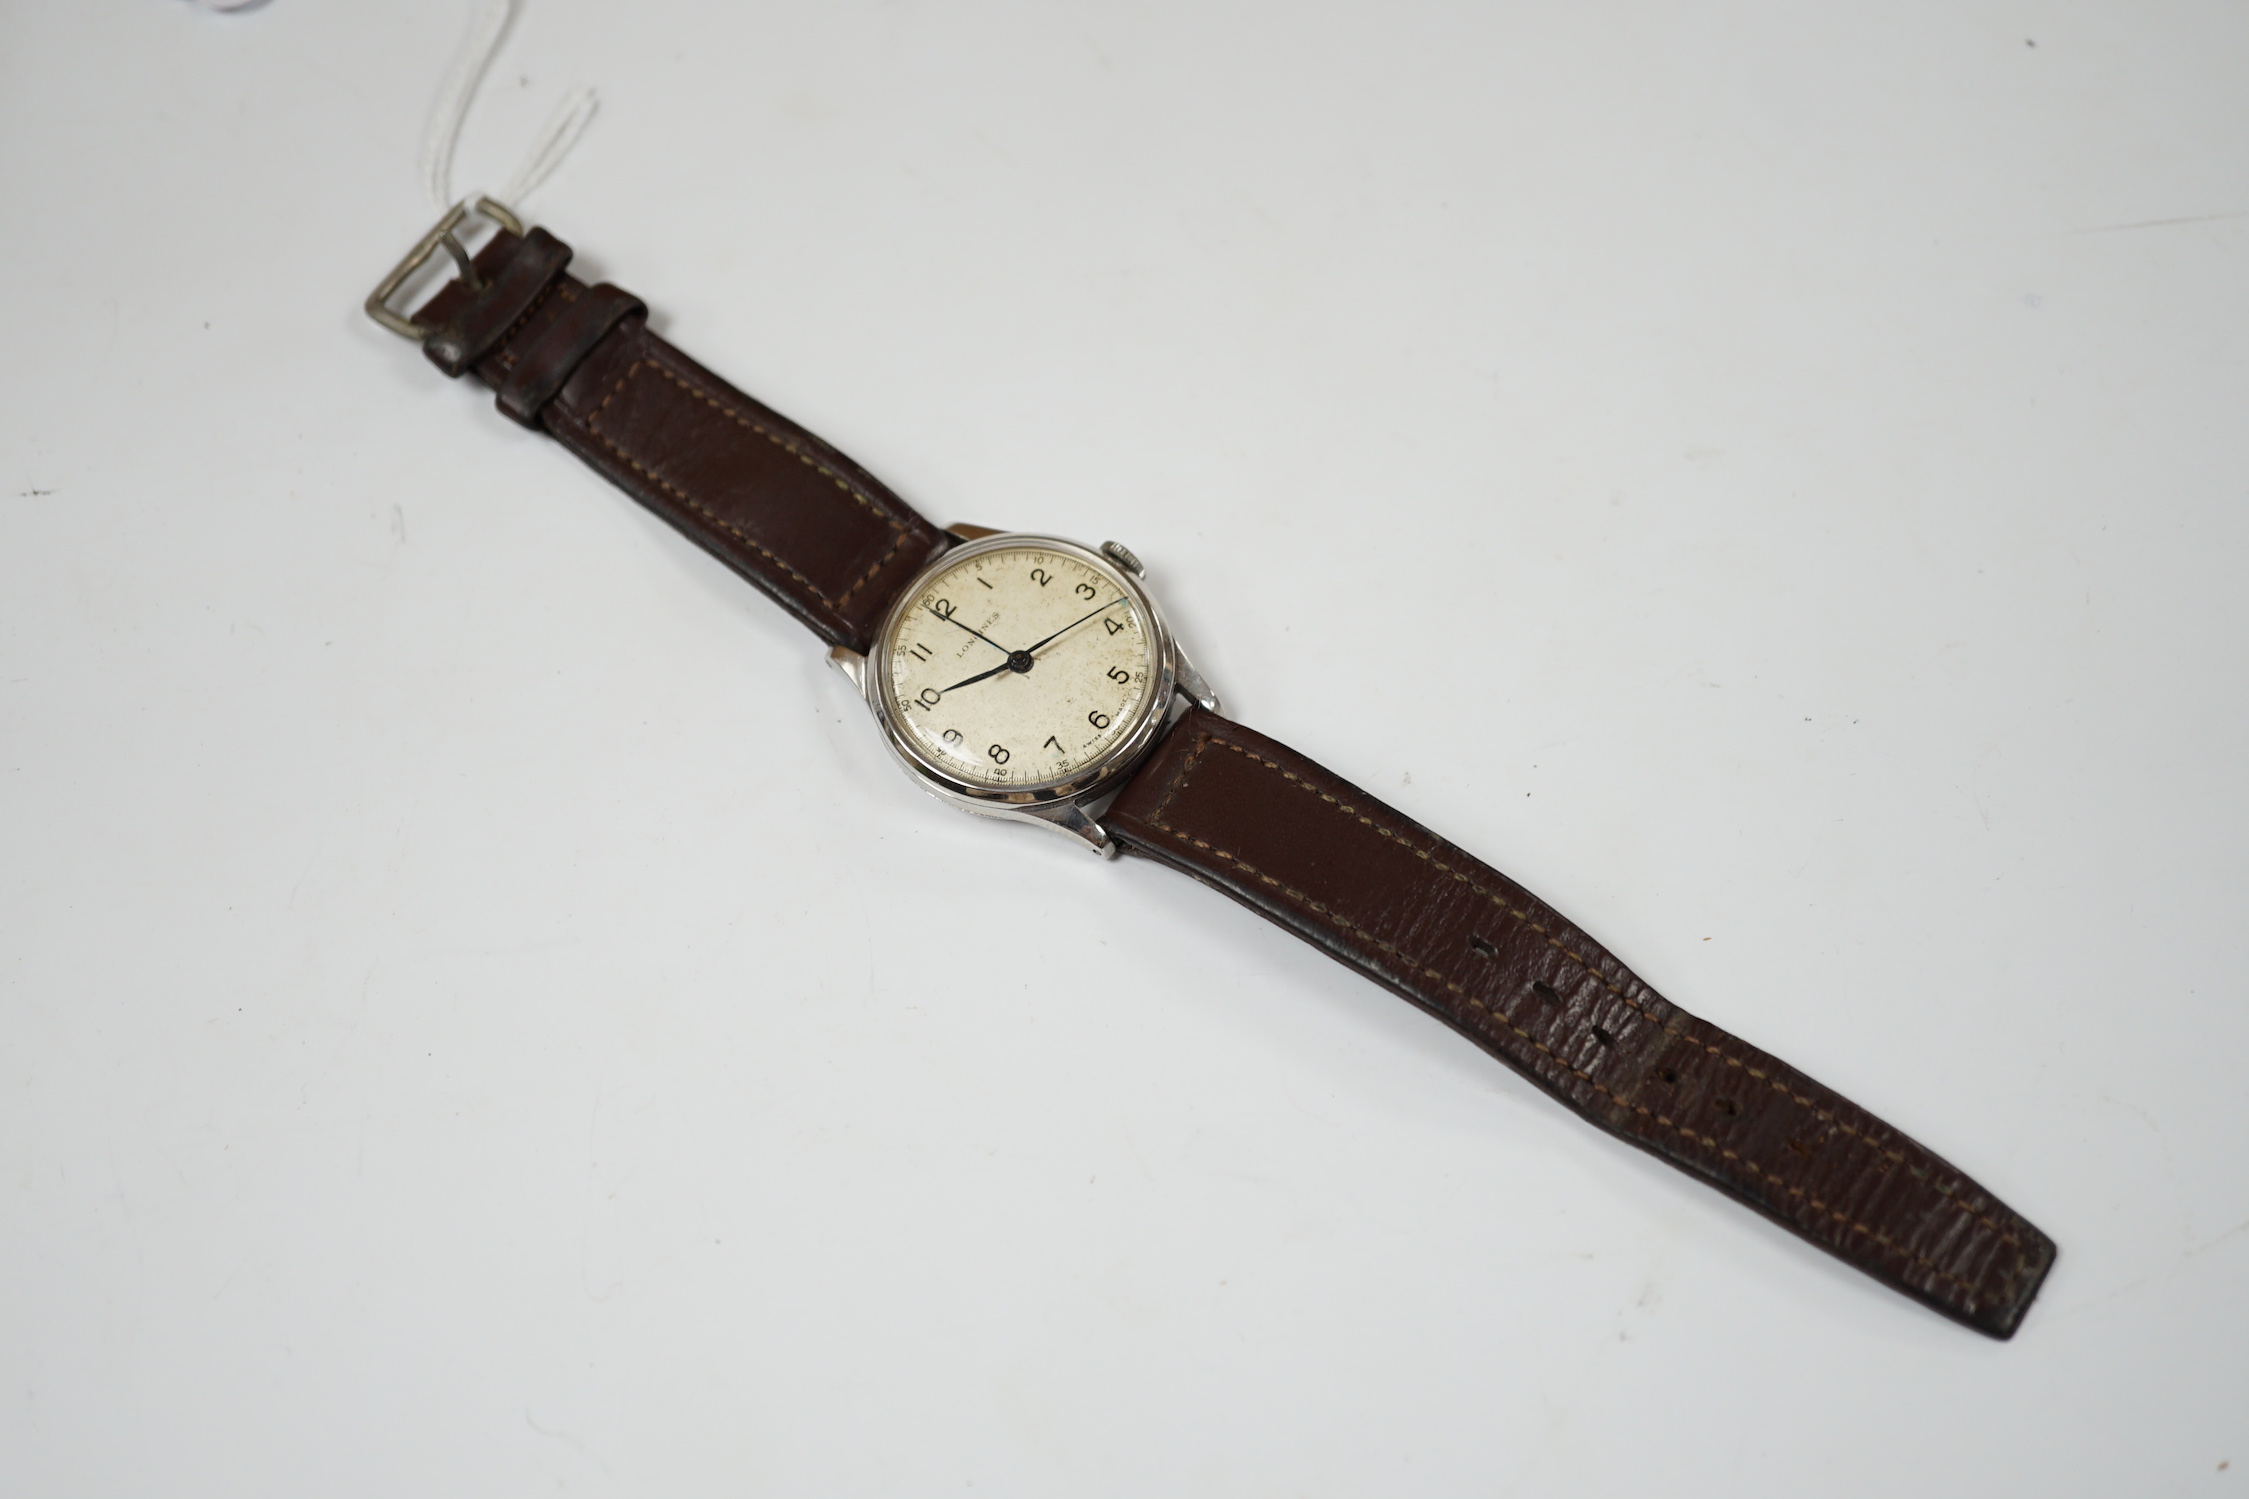 A gentleman's mid 20th century stainless steel Longines manual wind wrist watch, on associated leather strap, case diameter 34mm.